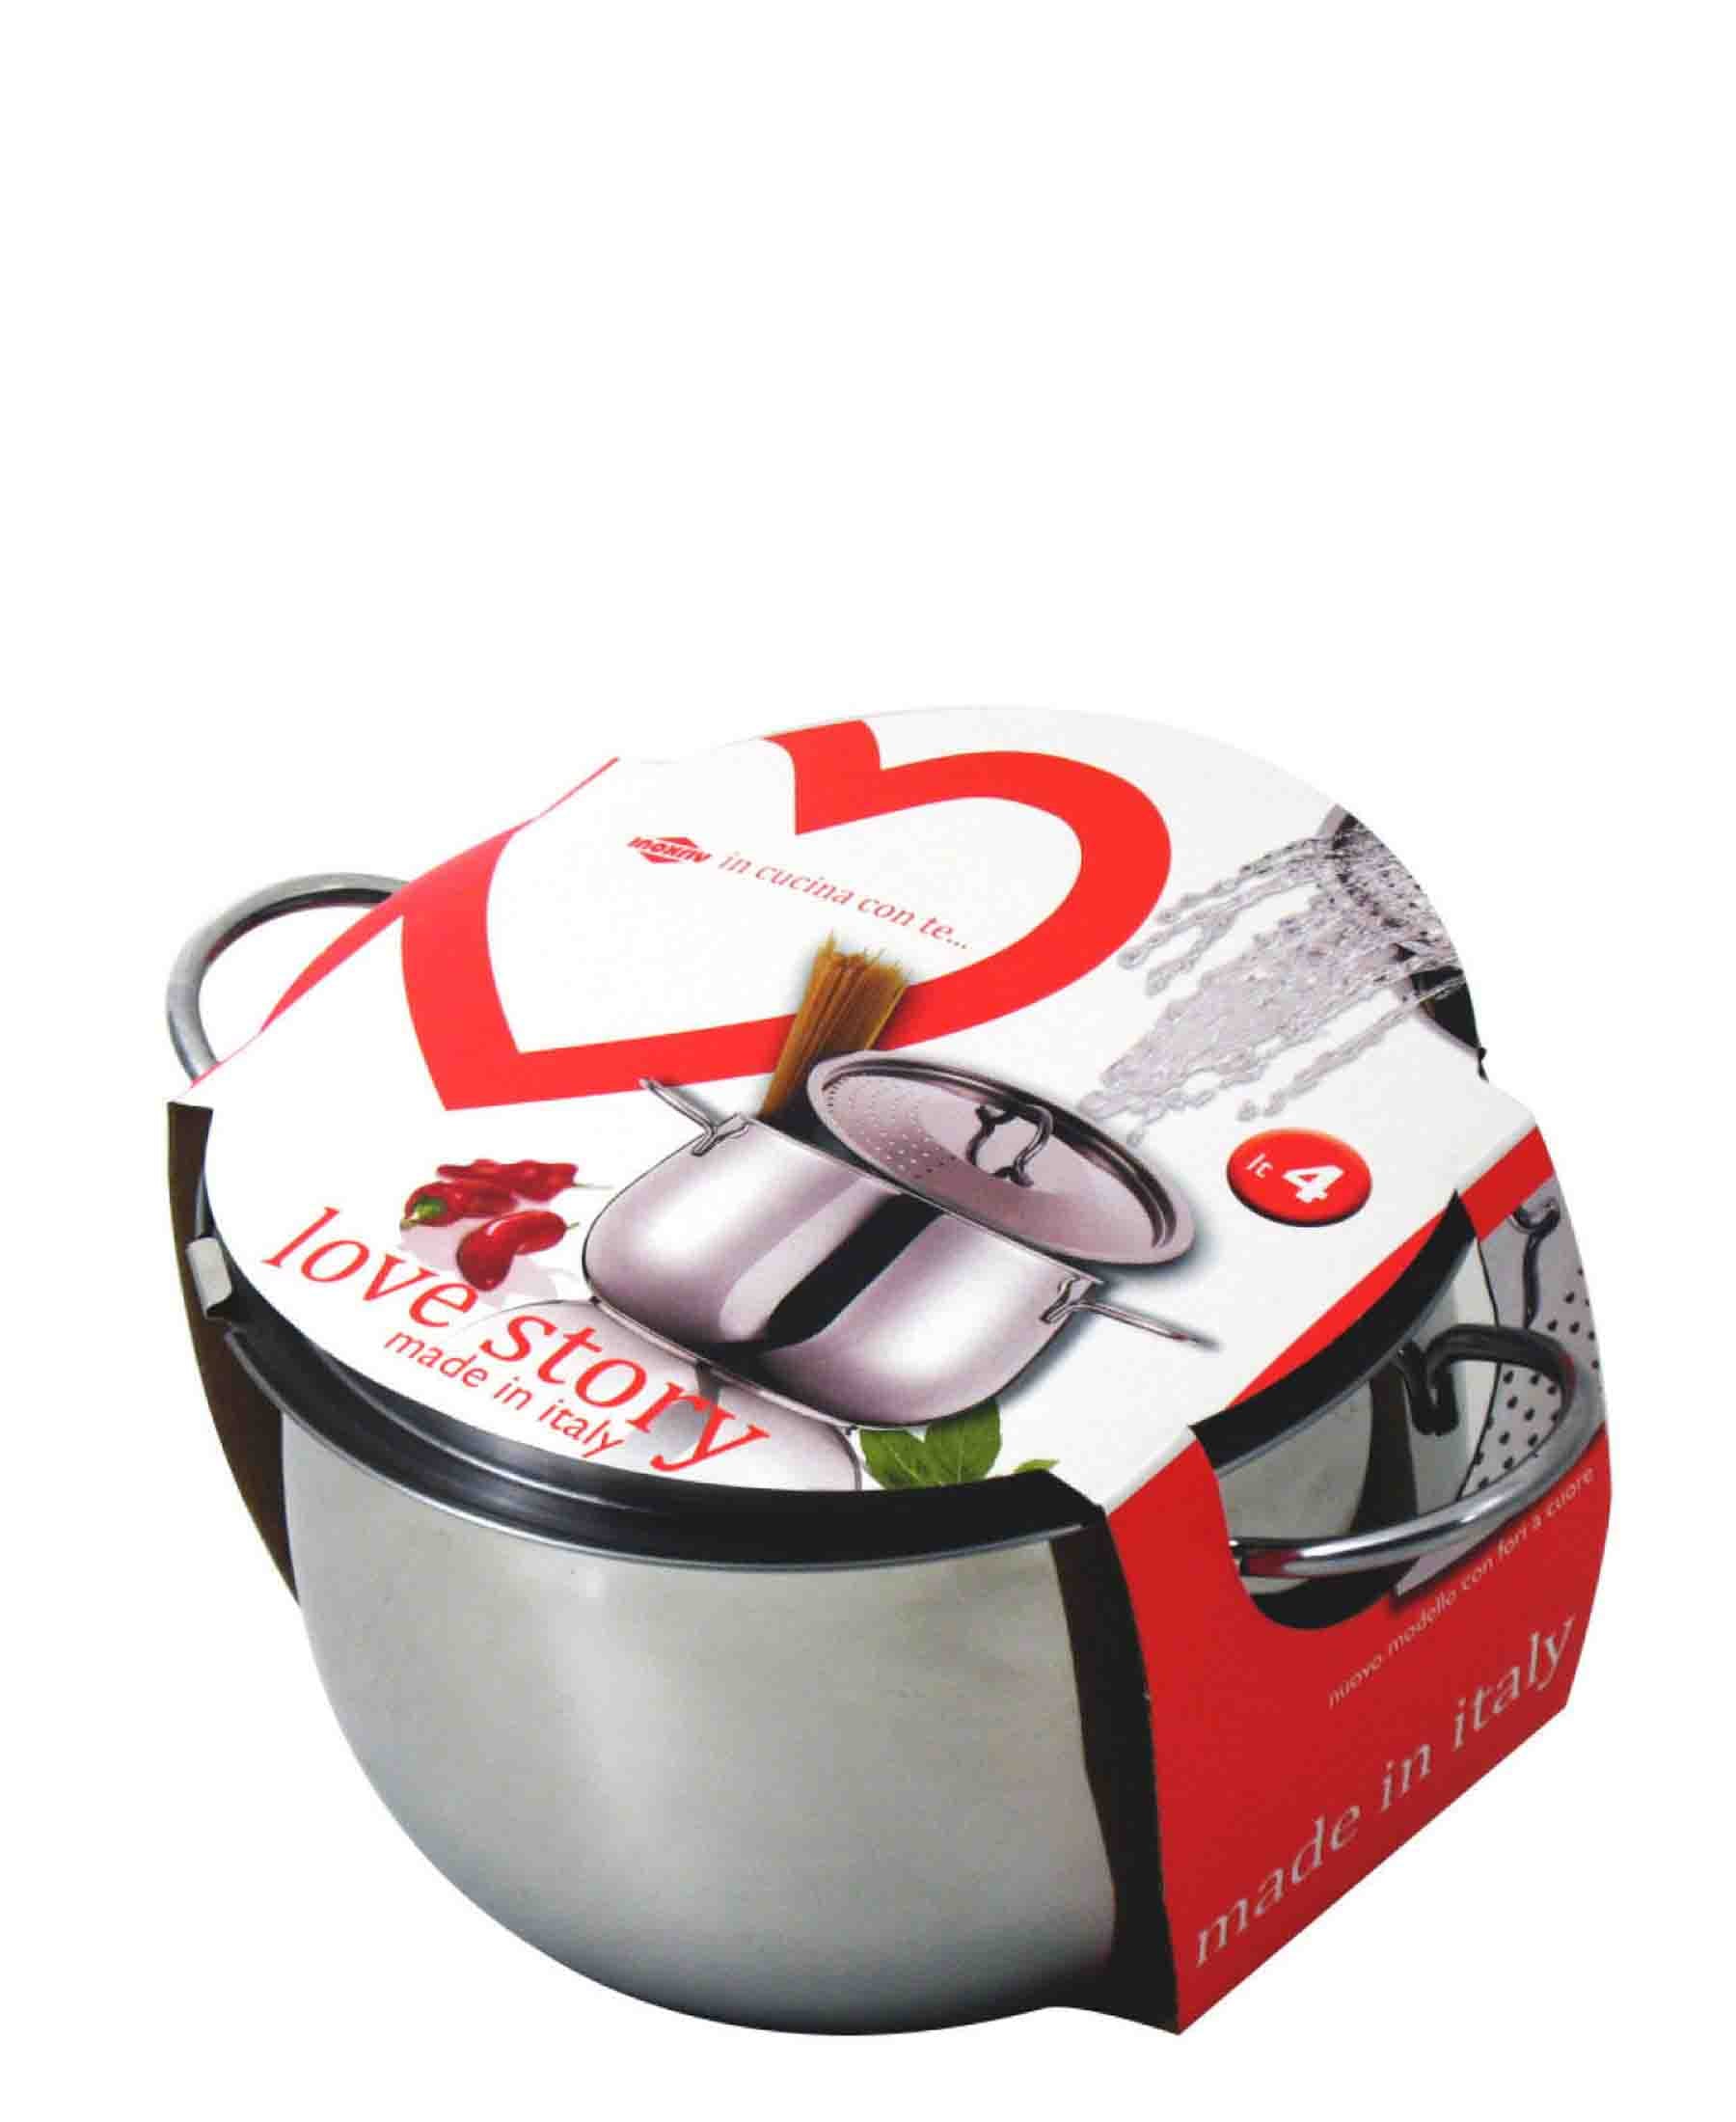 Kitchen Life Cook & Drain Pot With Lid 4.5lt - Silver